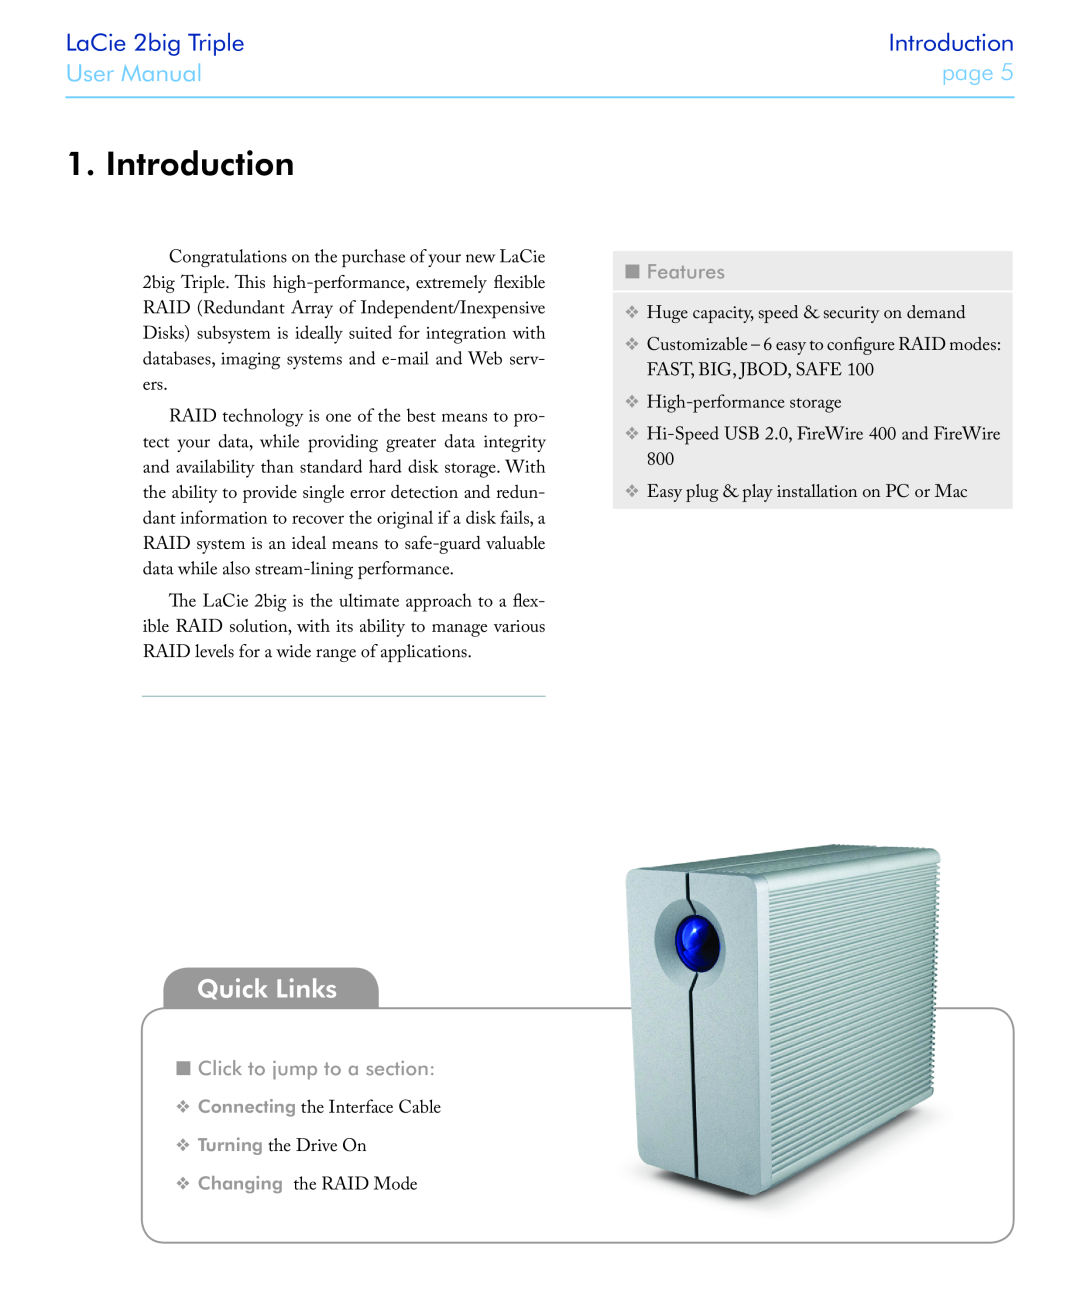 LaCie 2big triple Introduction, Features, Click to jump to a section, Quick Links, LaCie 2big Triple, User Manual, page  